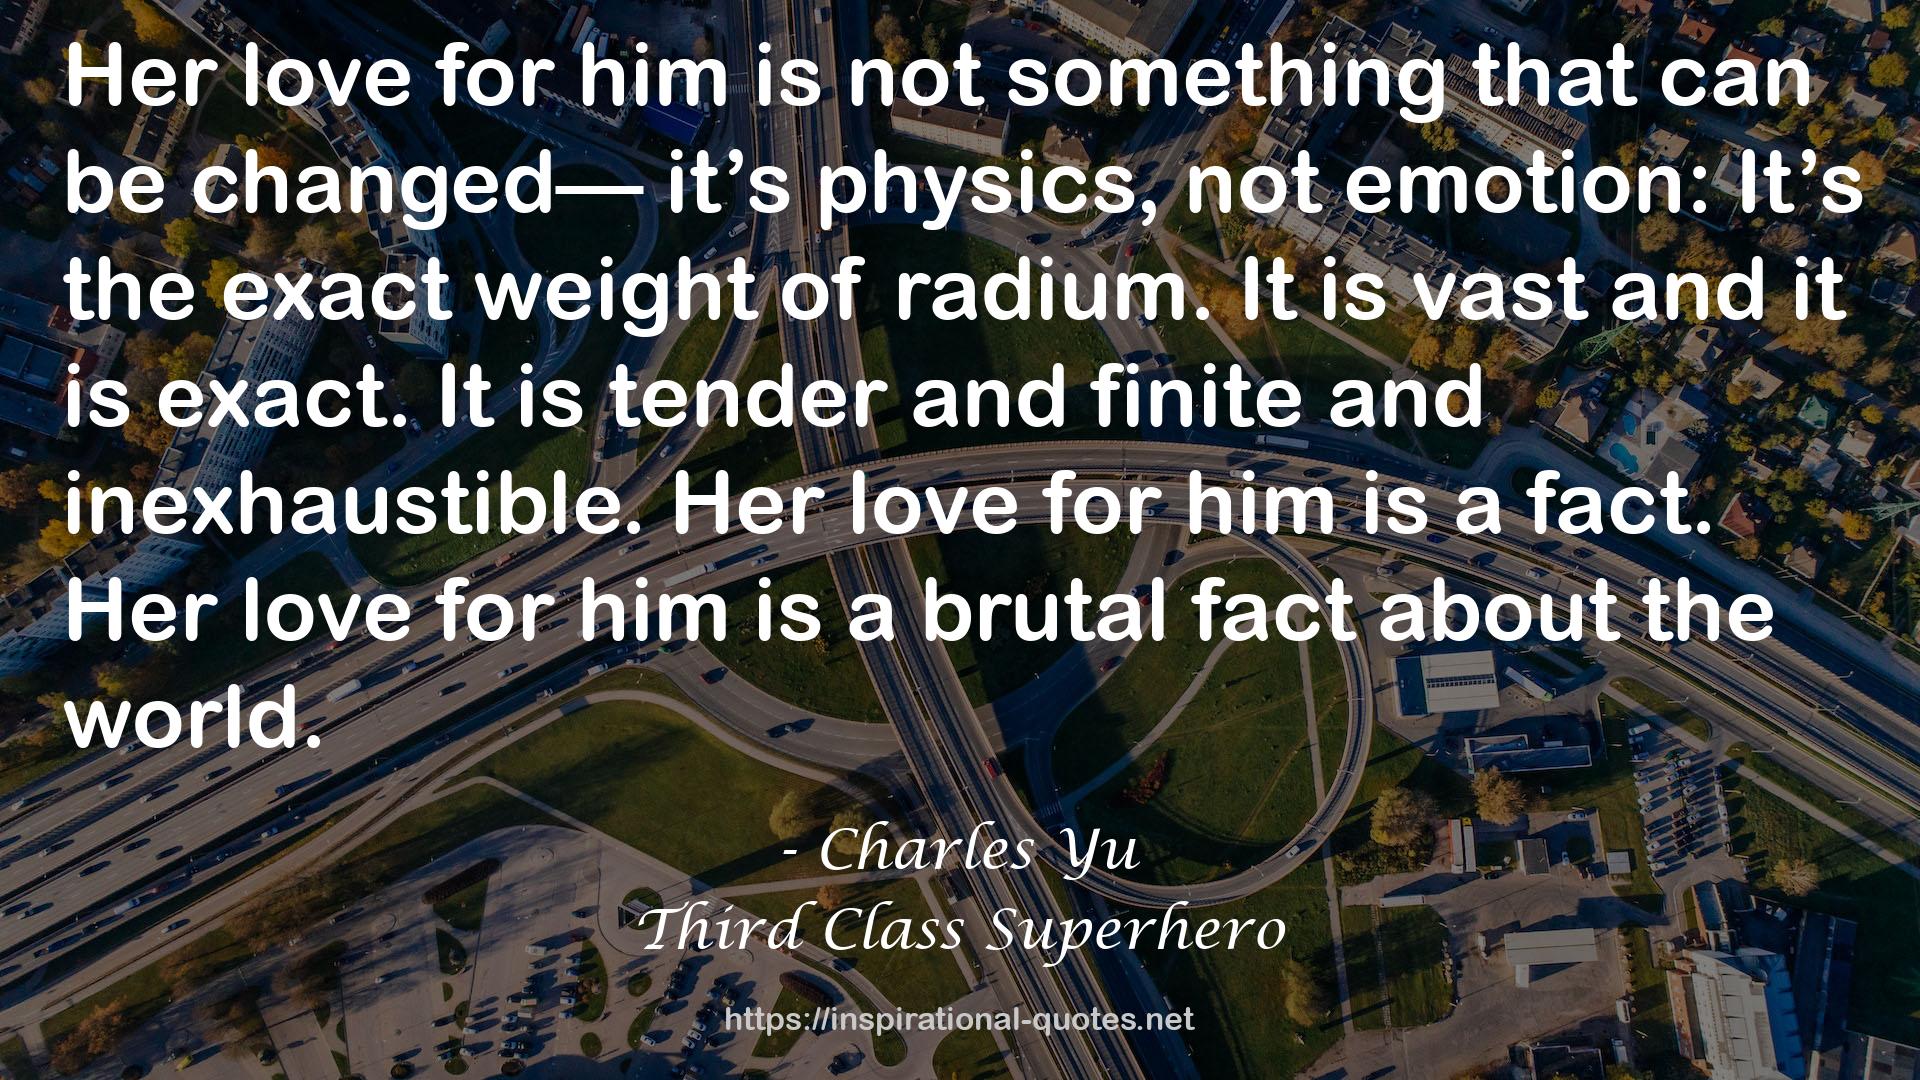 Charles Yu QUOTES